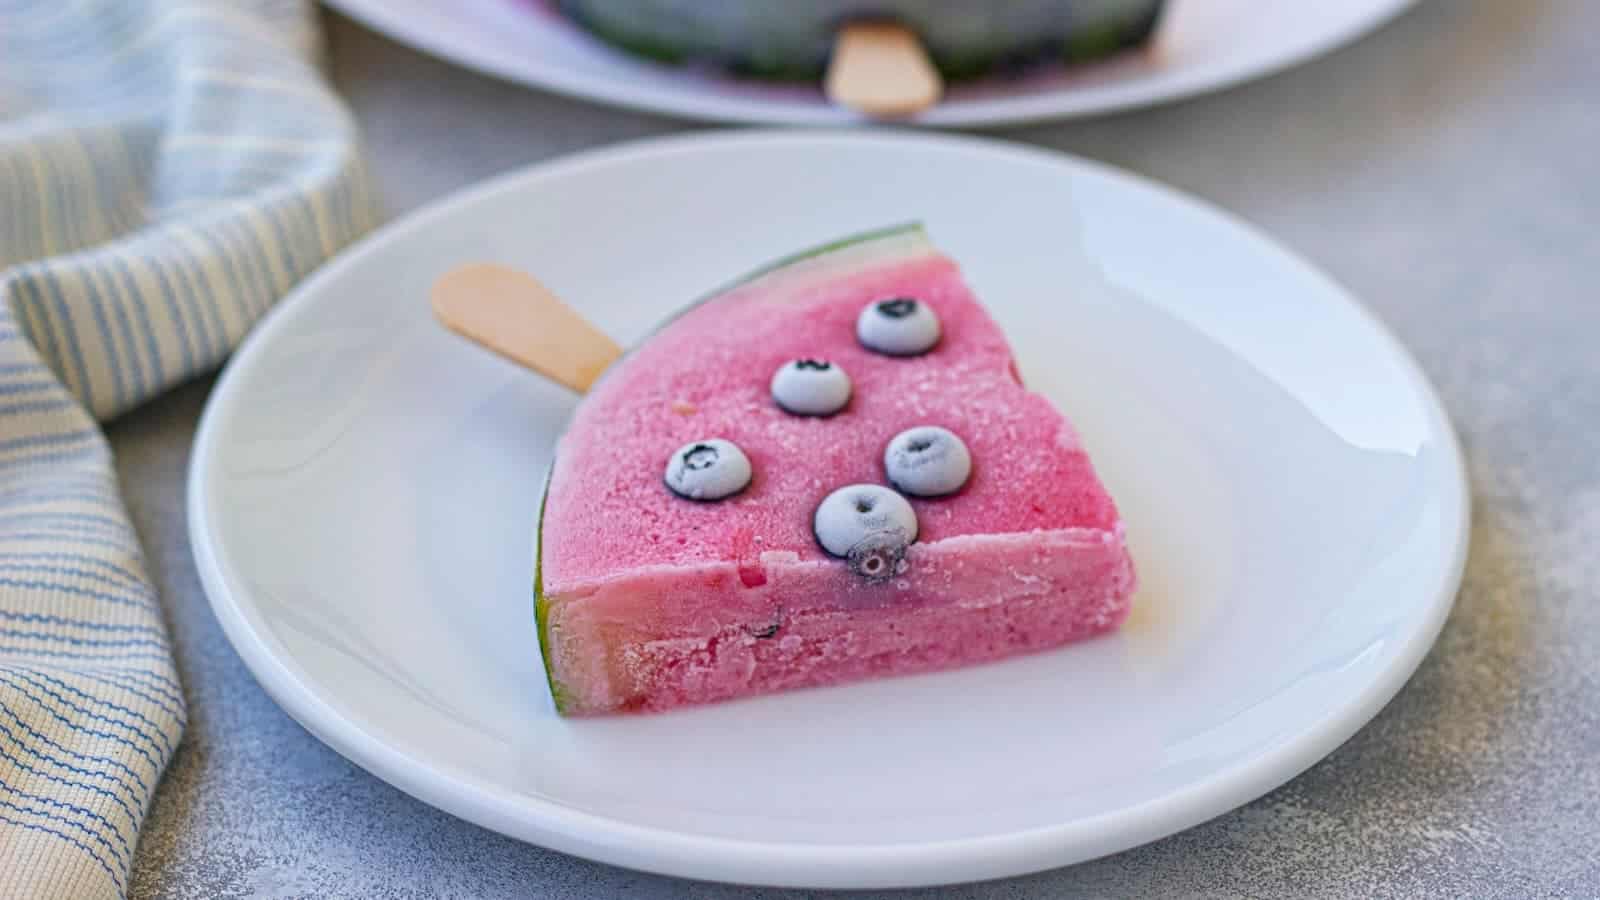 A slice of frozen watermelon wedge with blueberries, served on a white plate next to a striped napkin.